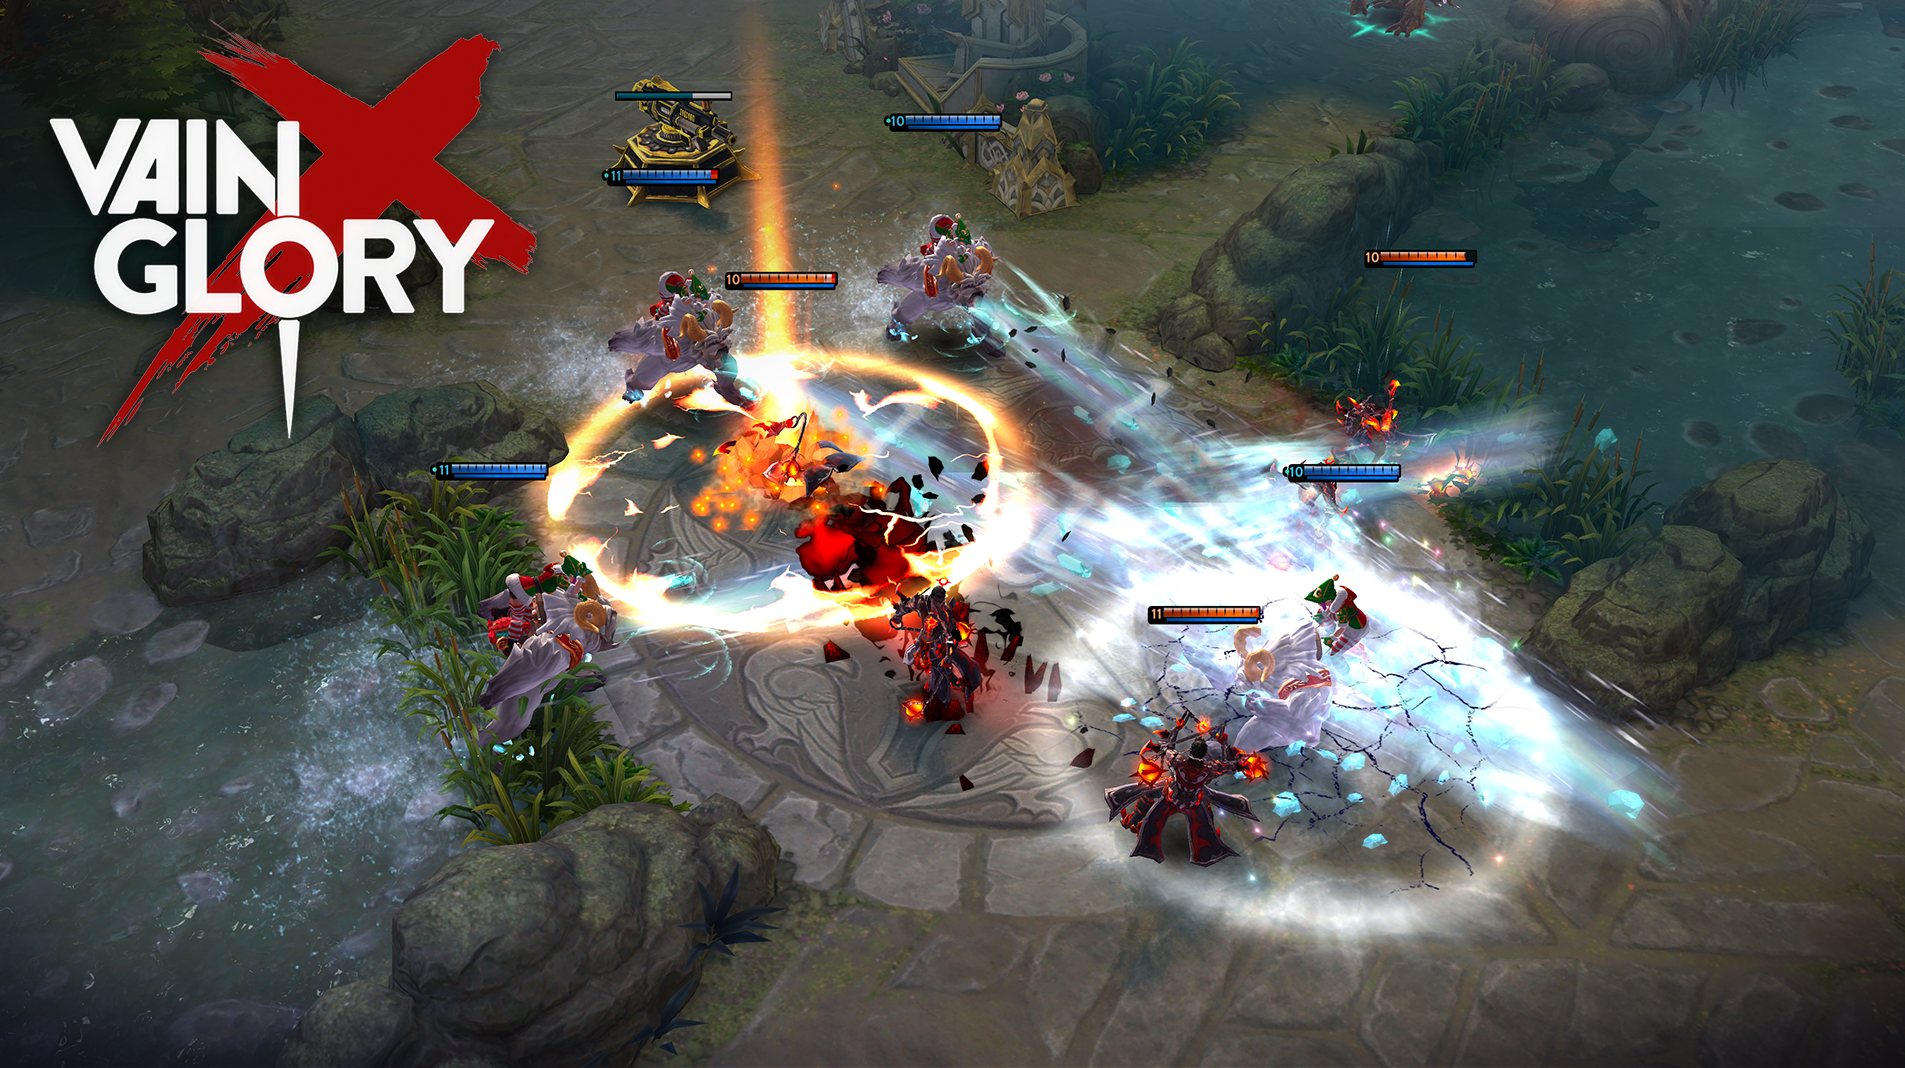 Image for Super Evil Megacorp partners with NetEase to launch Vainglory in China